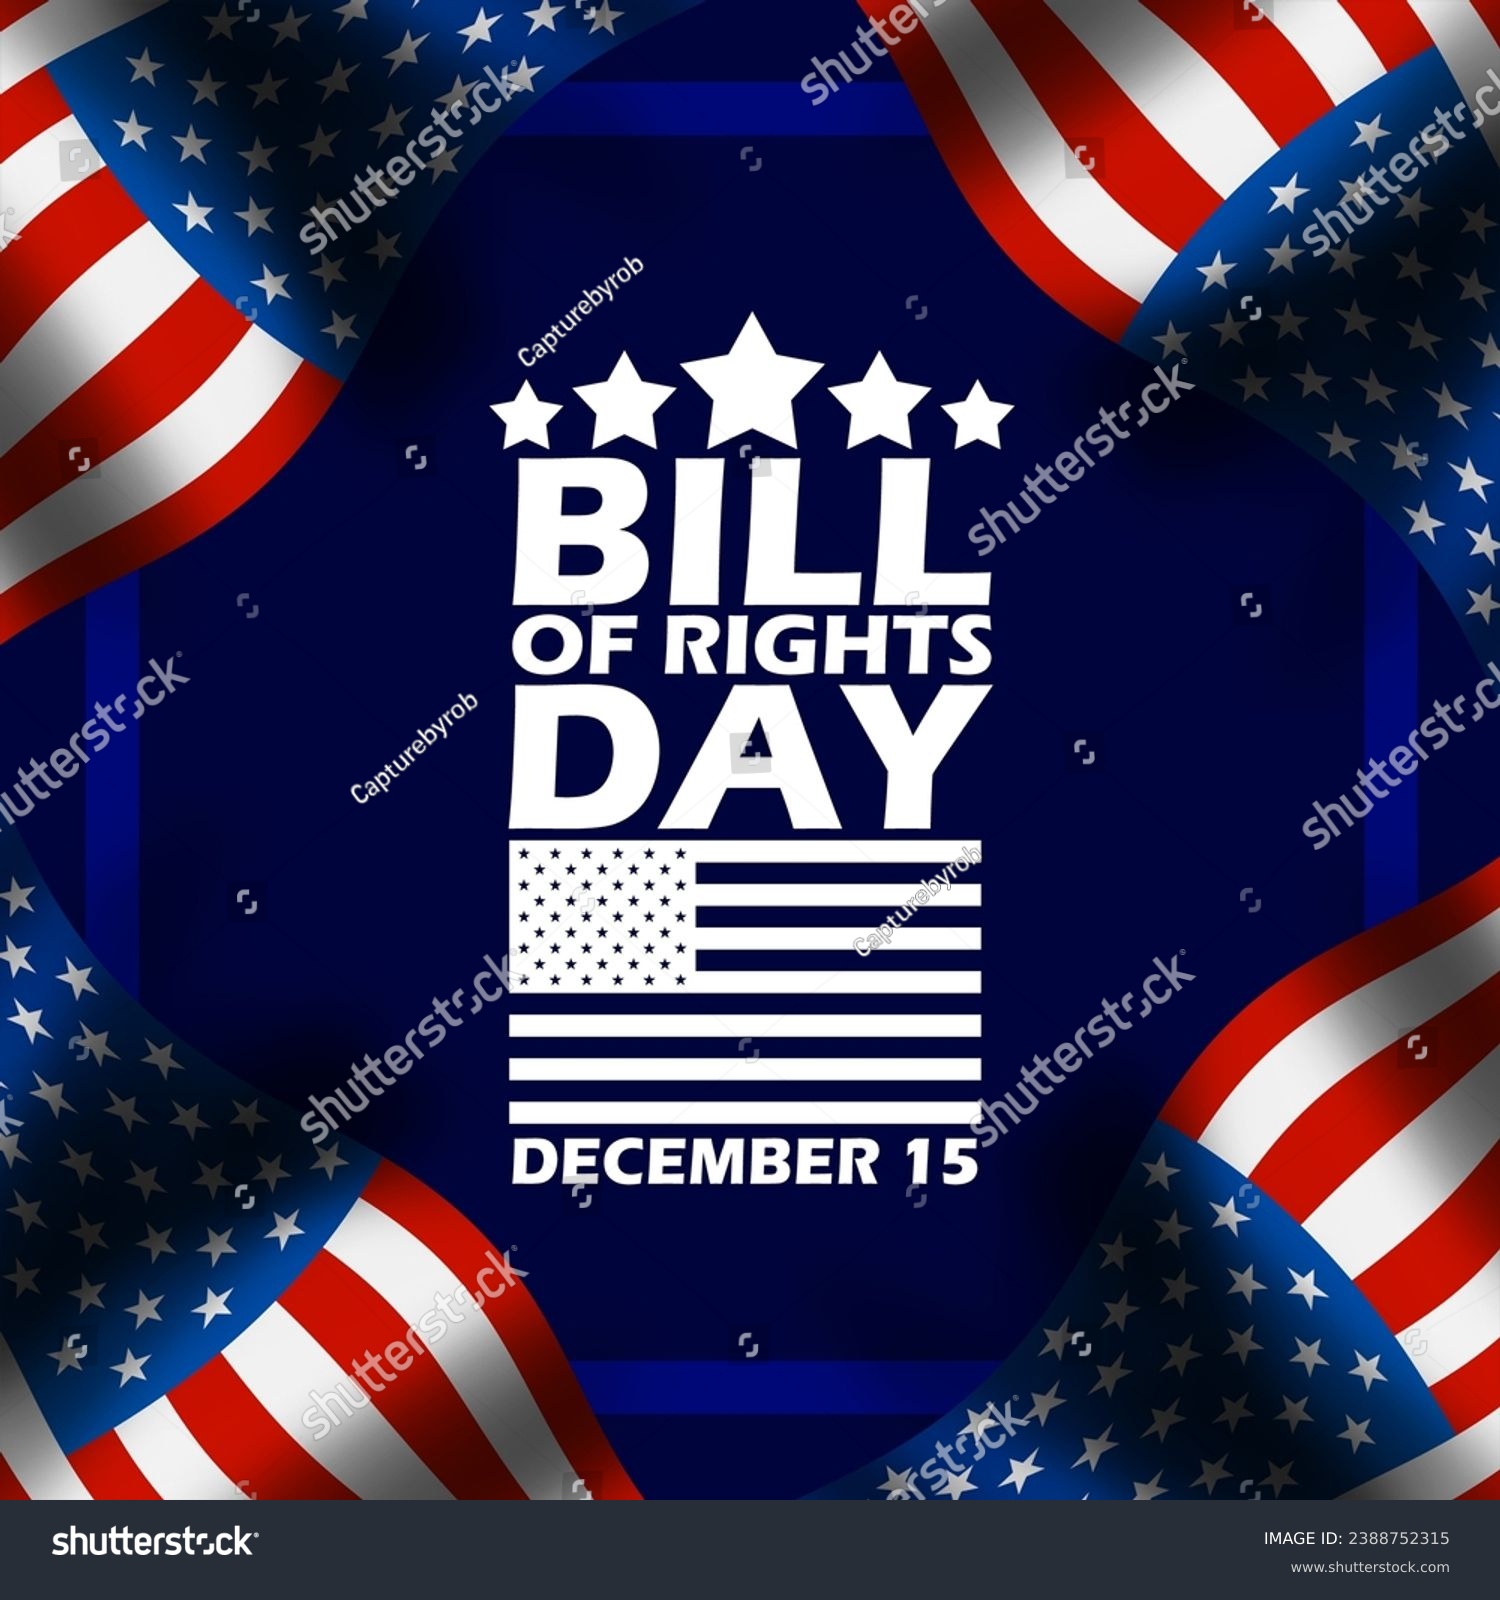 SVG of Bill of Rights Day banner. Bold text with American flags flying on a dark blue background to commemorate December 15th svg